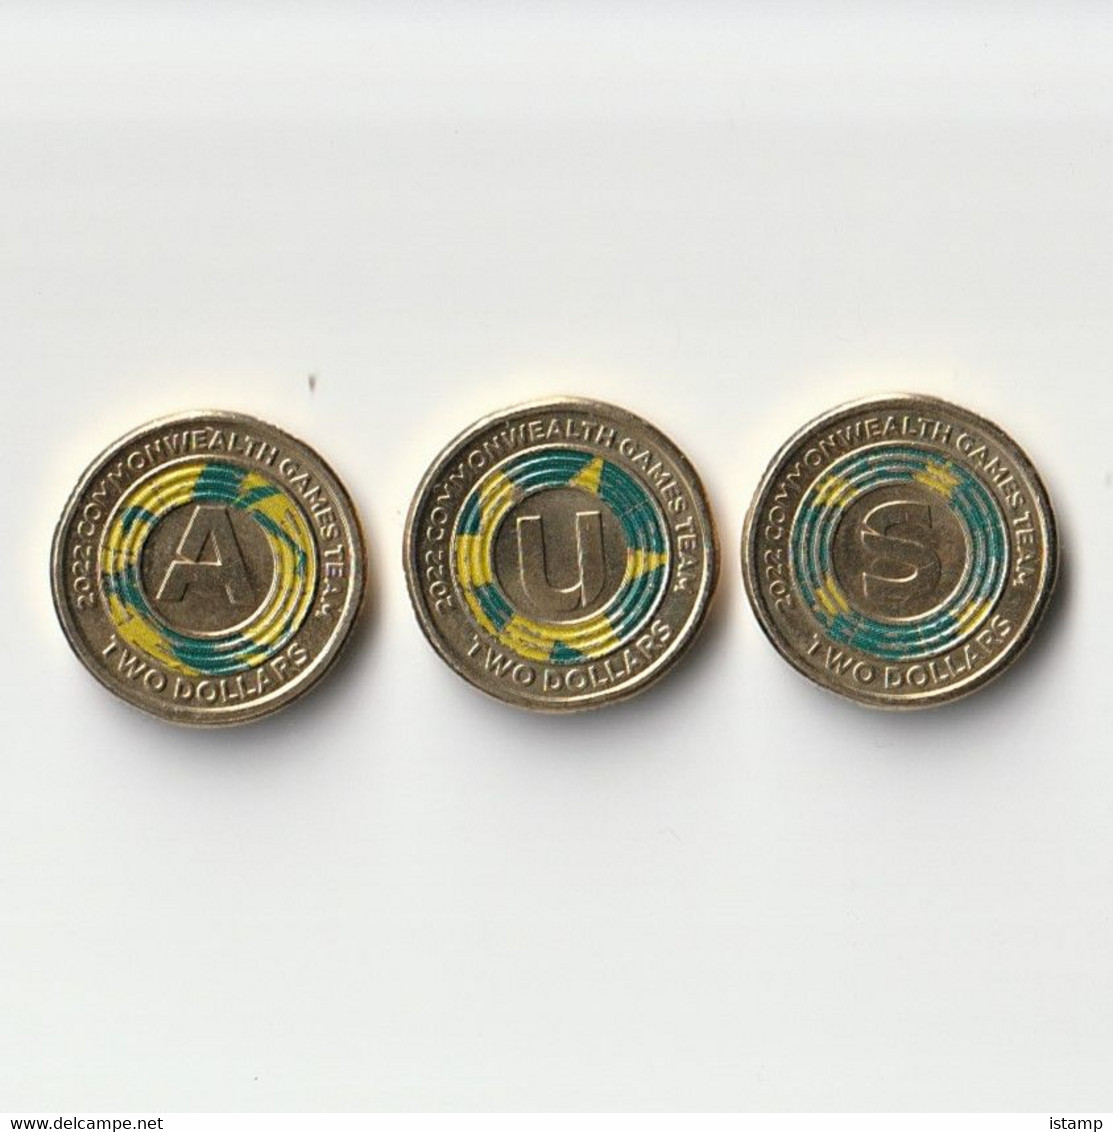 ⭐2022 - Australia COMMONWEALTH GAMES - Set Of 3 $2 Coins Circulated⭐ - 2 Dollars